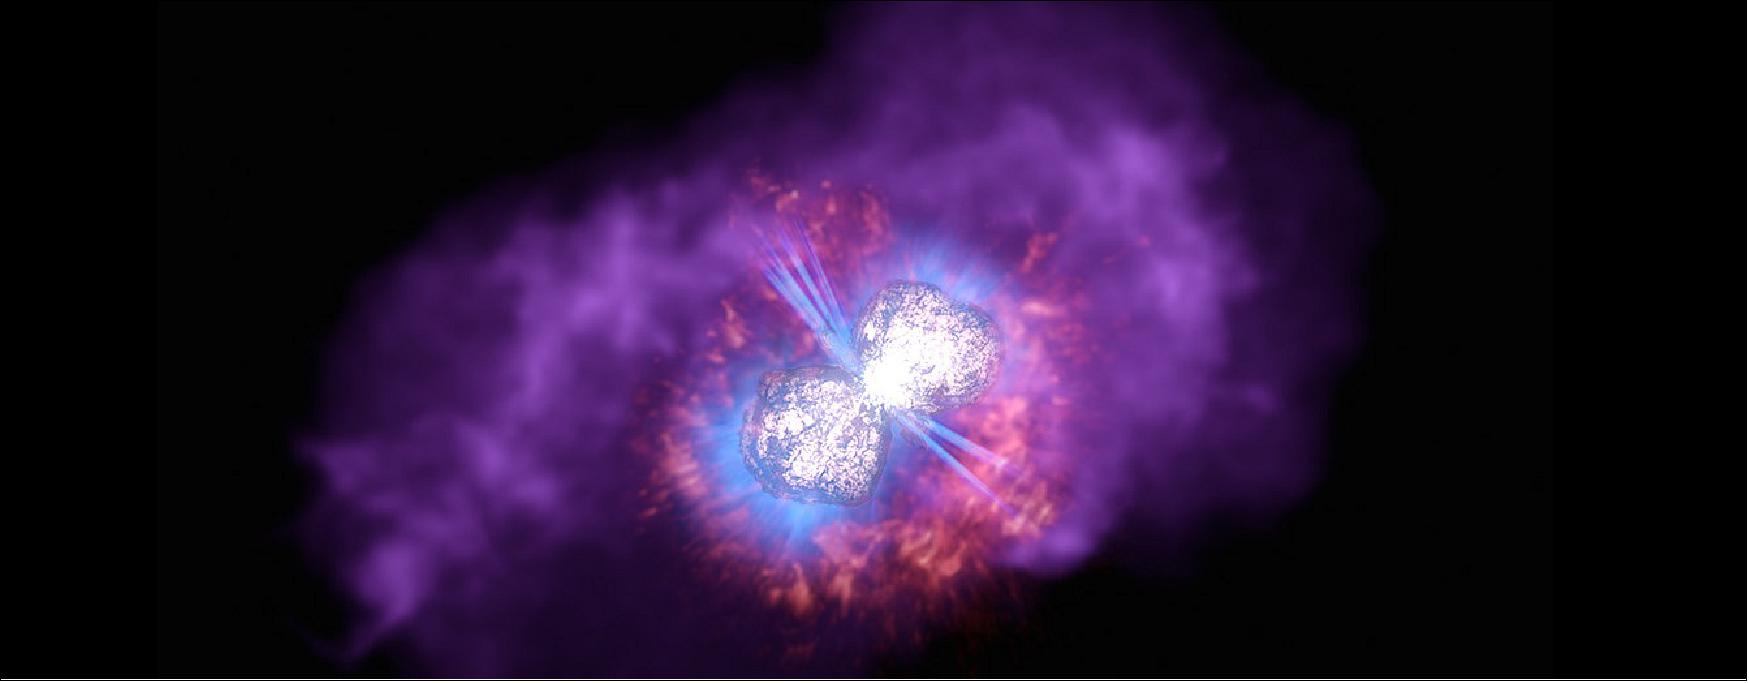 Figure 78: Eta Carinae, or Eta Car, is famous for a brilliant and unusual outburst, called the "Great Eruption," observed in the 1840s. This briefly made it one of the brightest stars in the night sky, releasing almost as much visible light as a supernova explosion. - The star survived the outburst, and slowly faded away for the next five decades. The primary cause of this brightness change is a small nebula of gas and dust, called the Homunculus Nebula, that was expelled during the blast, and has blocked the light of the star (image credit: NASA/STScI Team)